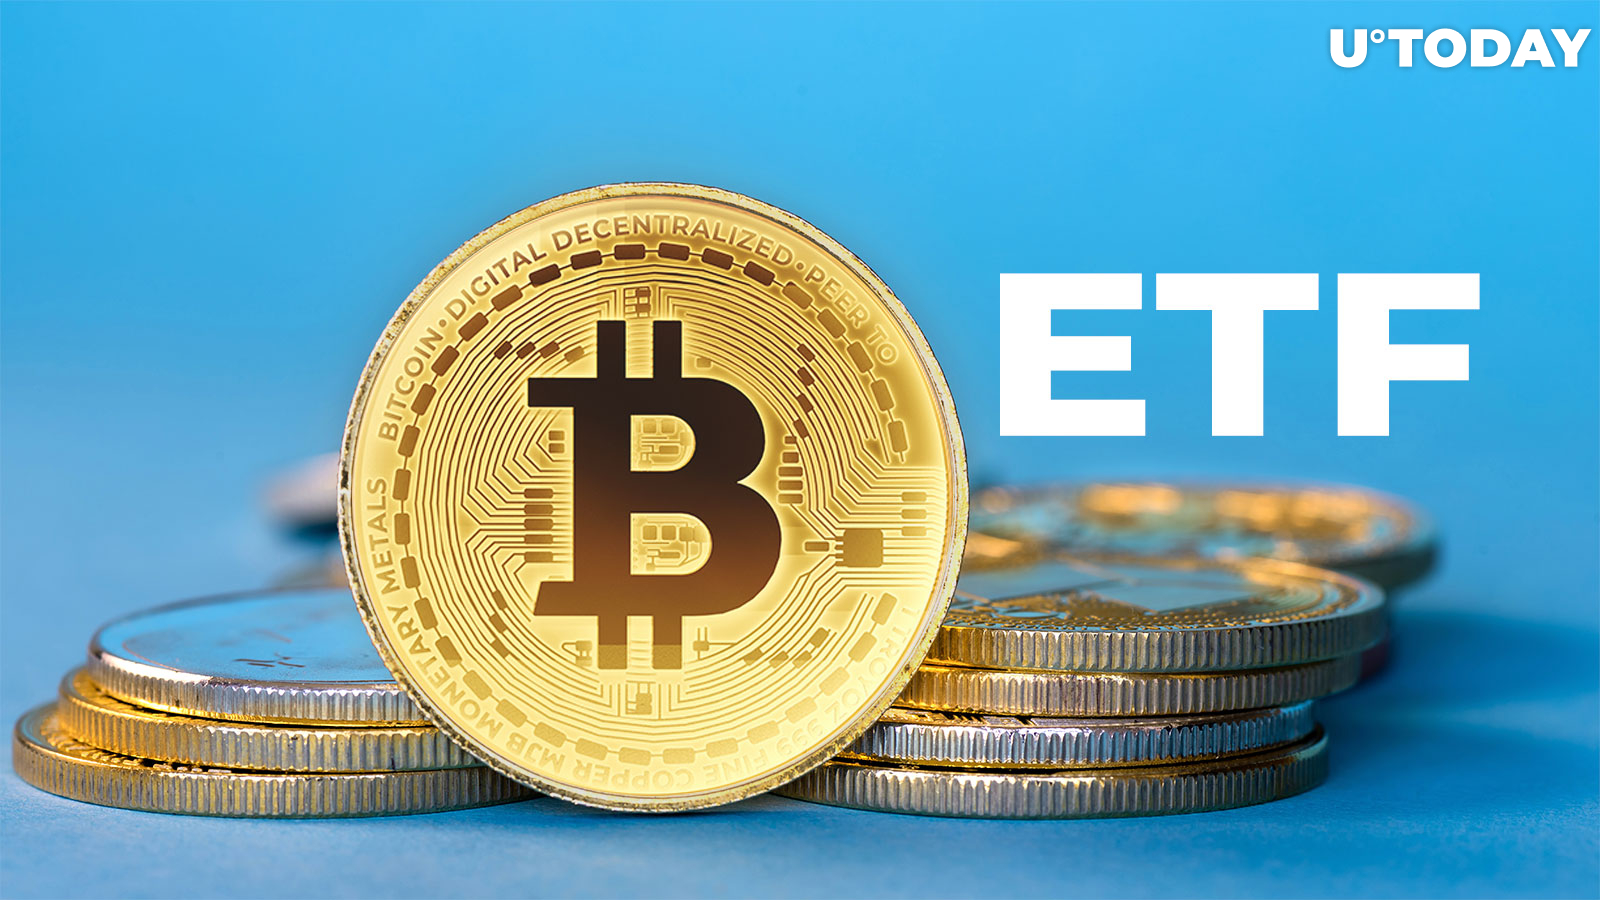 Spot Bitcoin ETF Approval Is Almost Done Deal, Bloomberg Analysts Argue